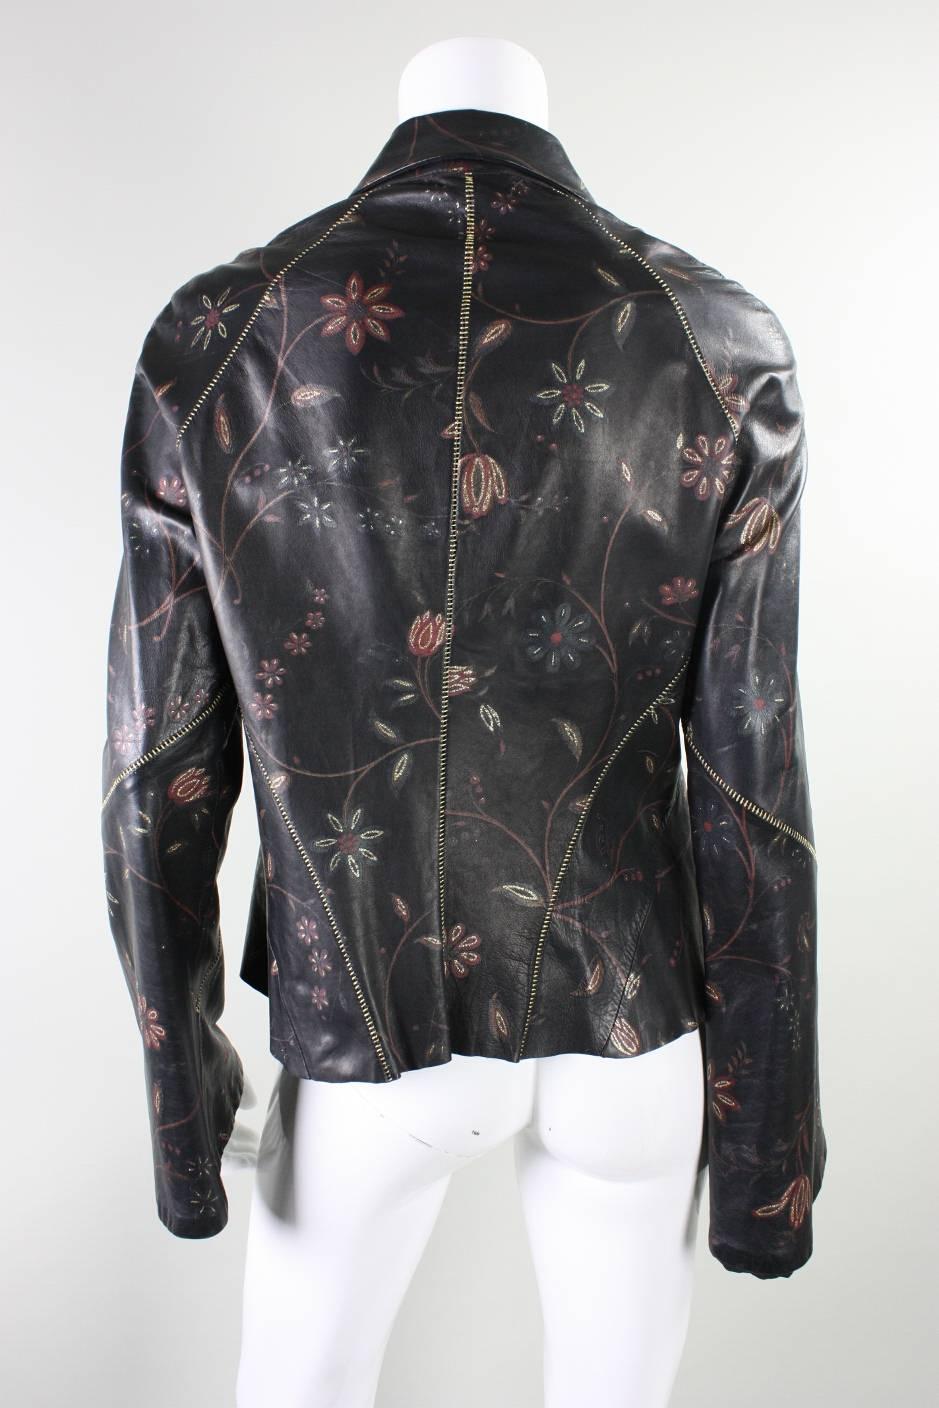 Roberto Cavalli Leather Blouse or Jacket with Gold Stitching In Excellent Condition For Sale In Los Angeles, CA